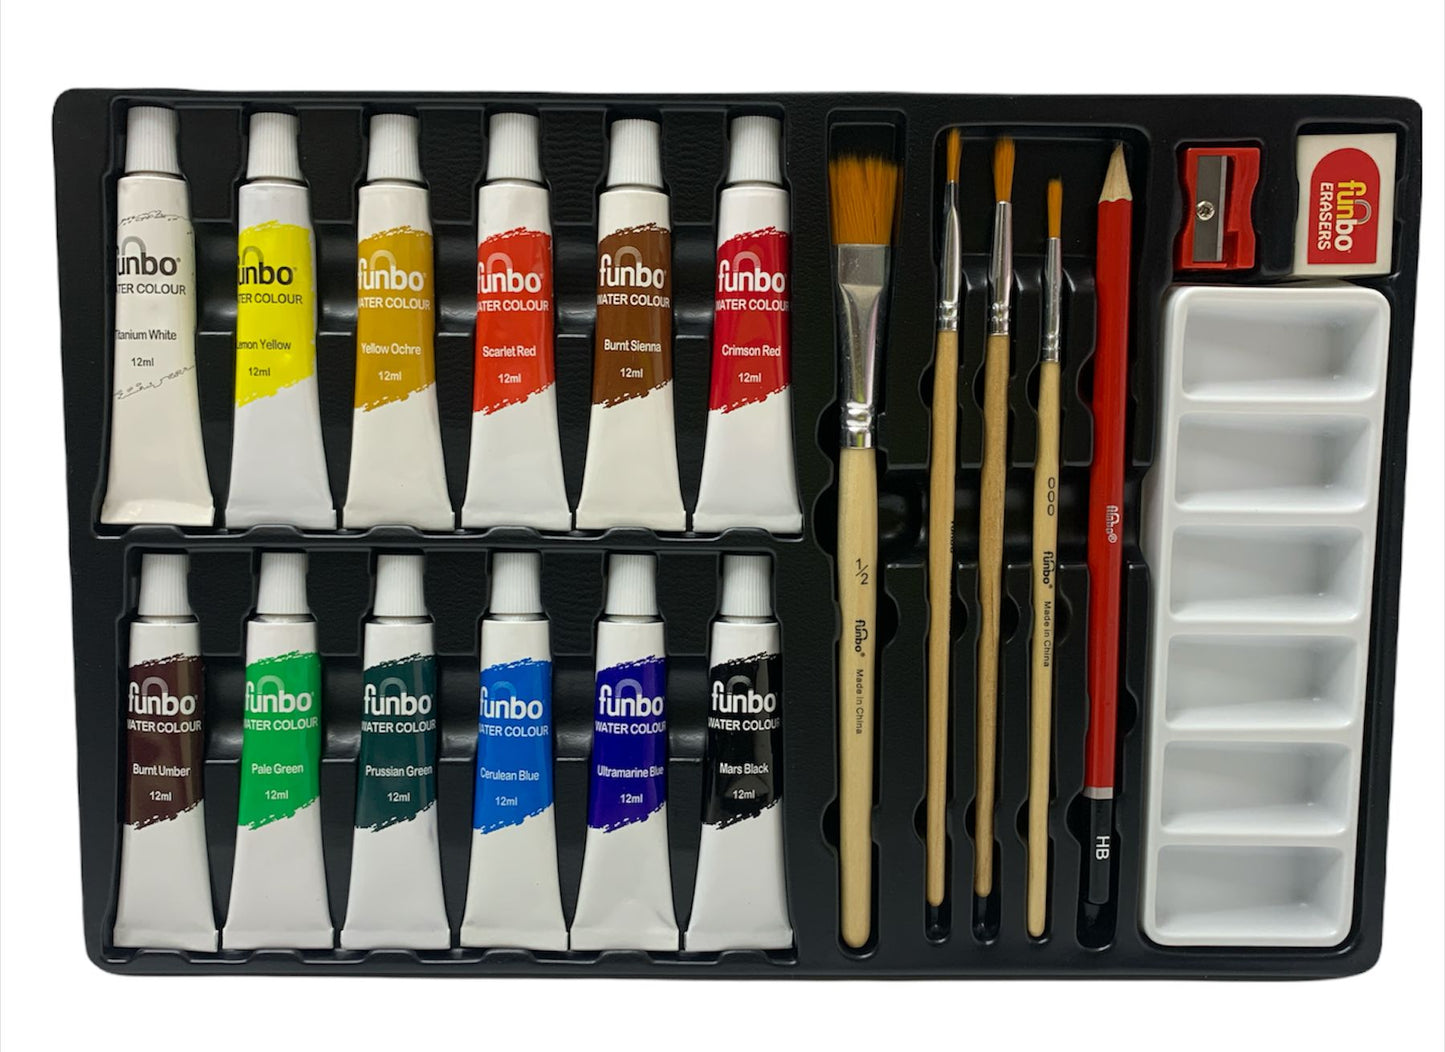 Funbo Watercolor Painting Set || طقم رسم مائي فنبو